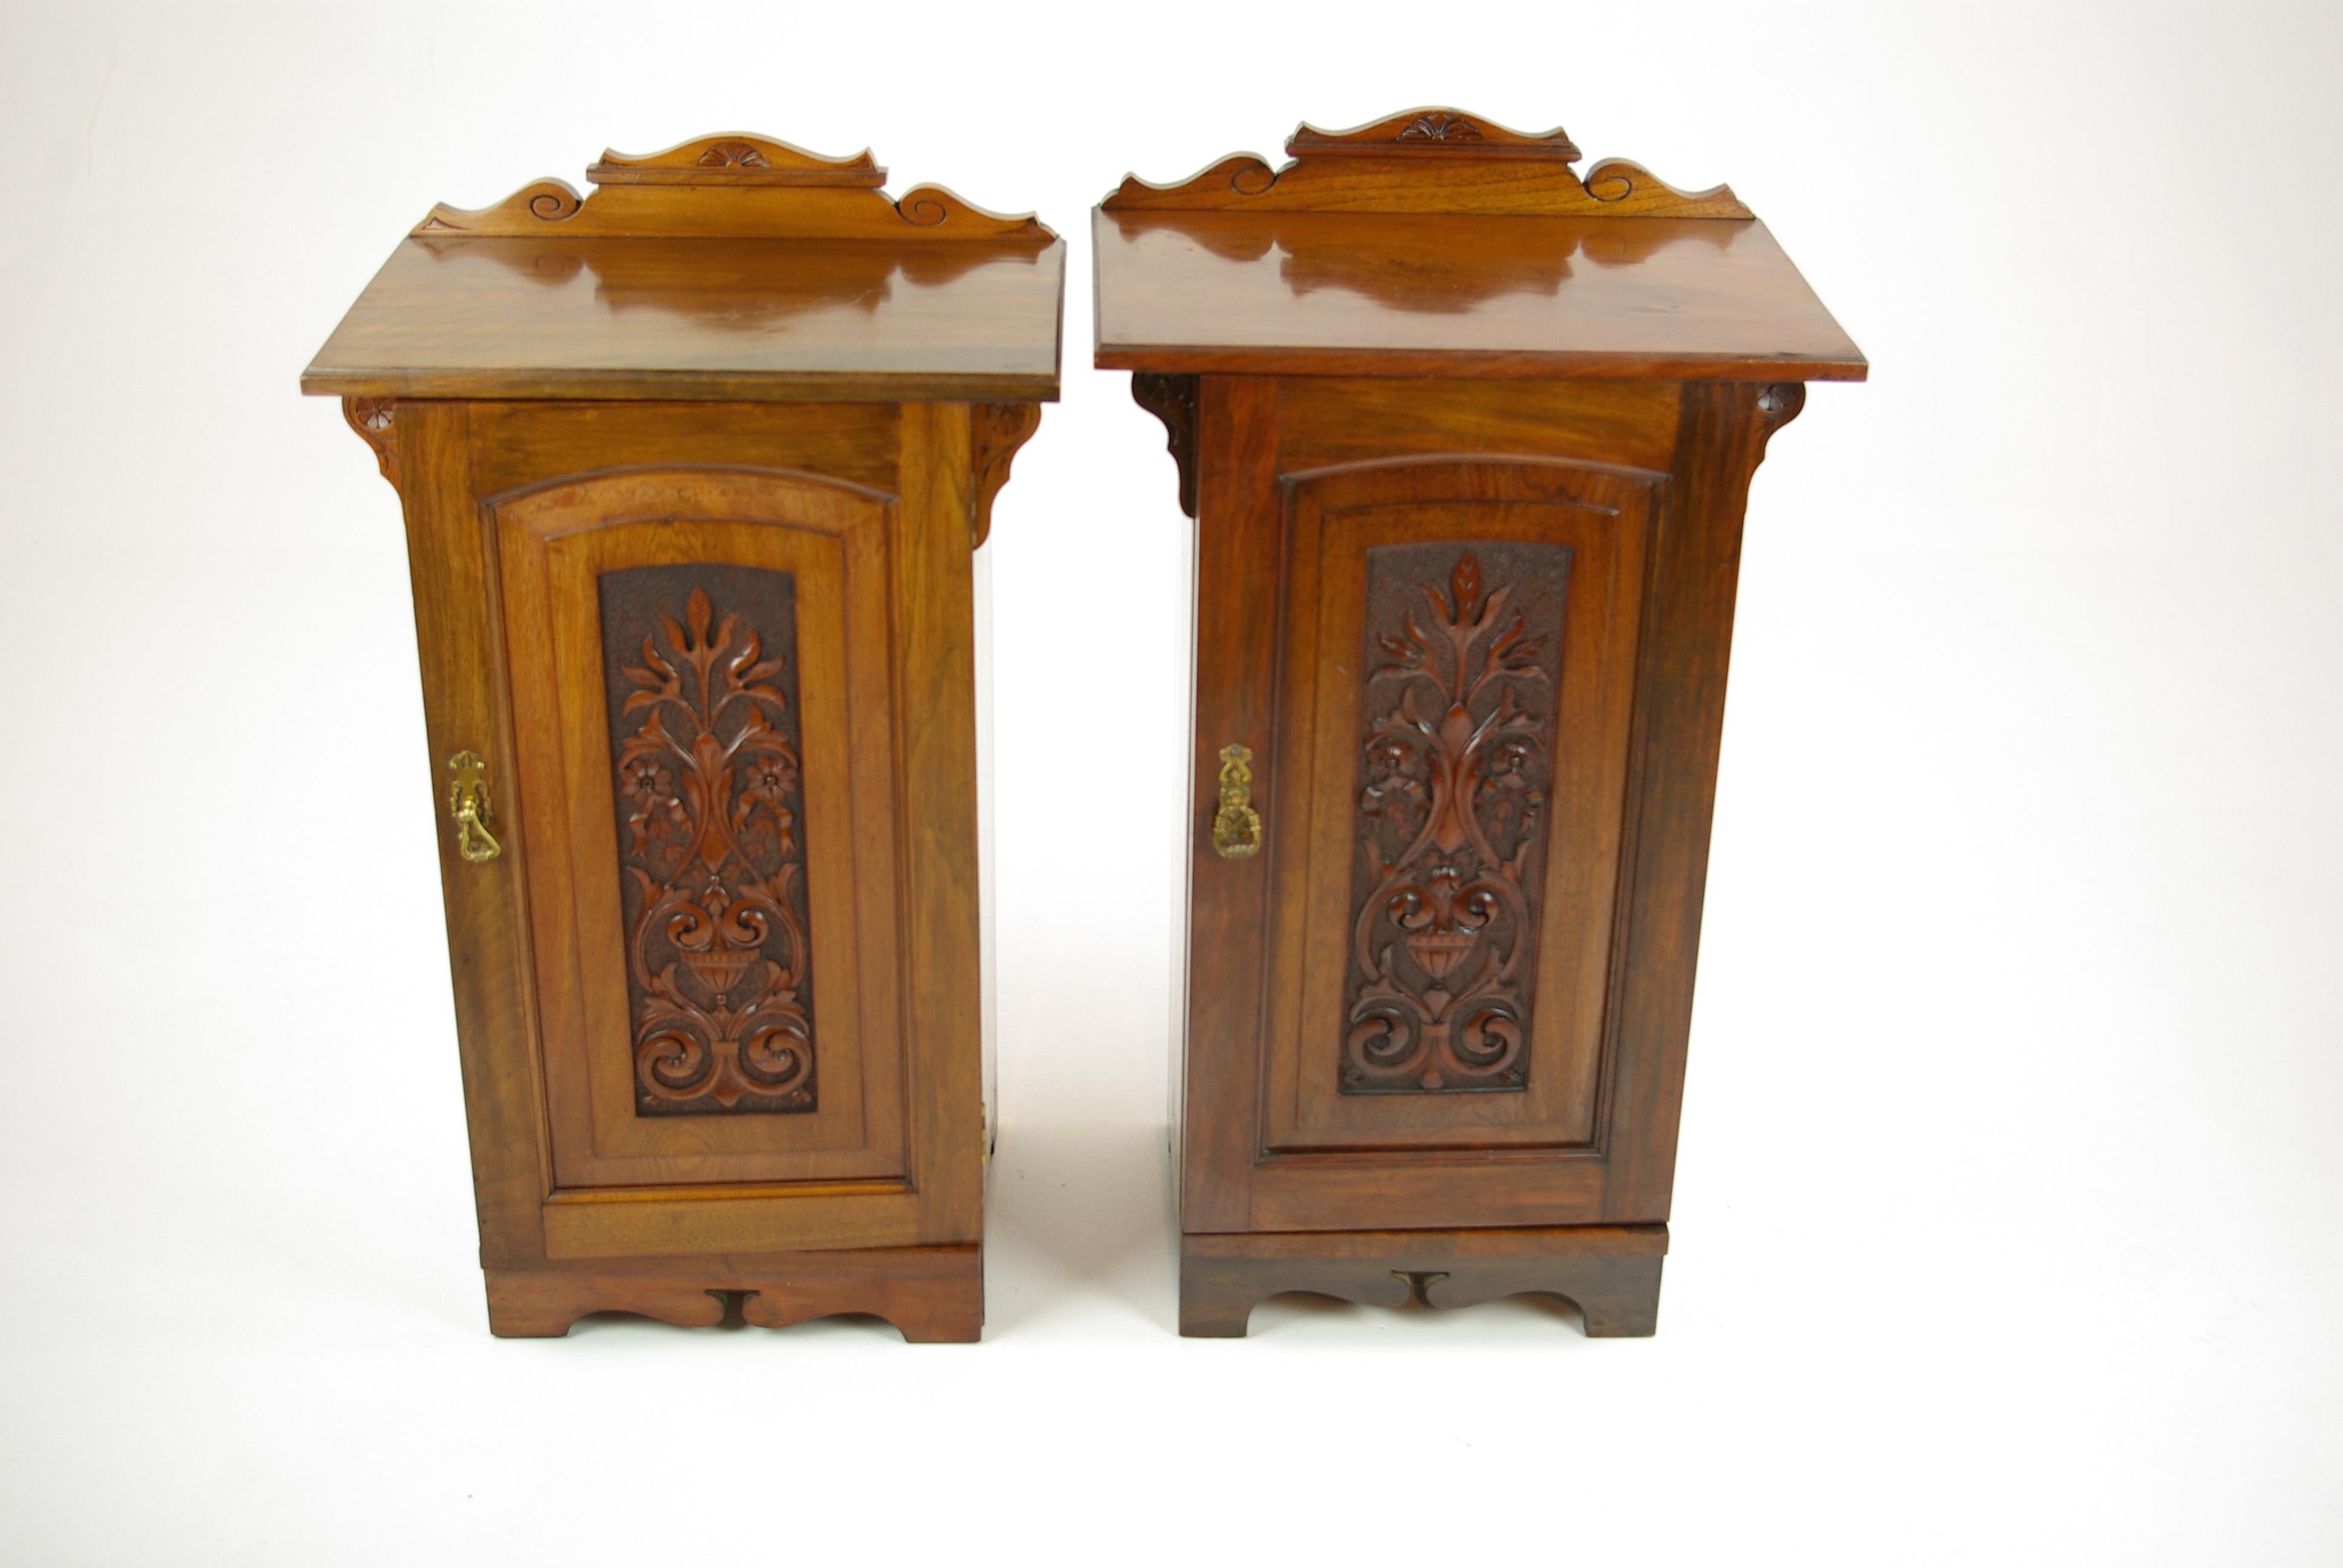 Victorian Antique Nightstands, Pair of Nightstands, Bedside Tables, Lamp Tables